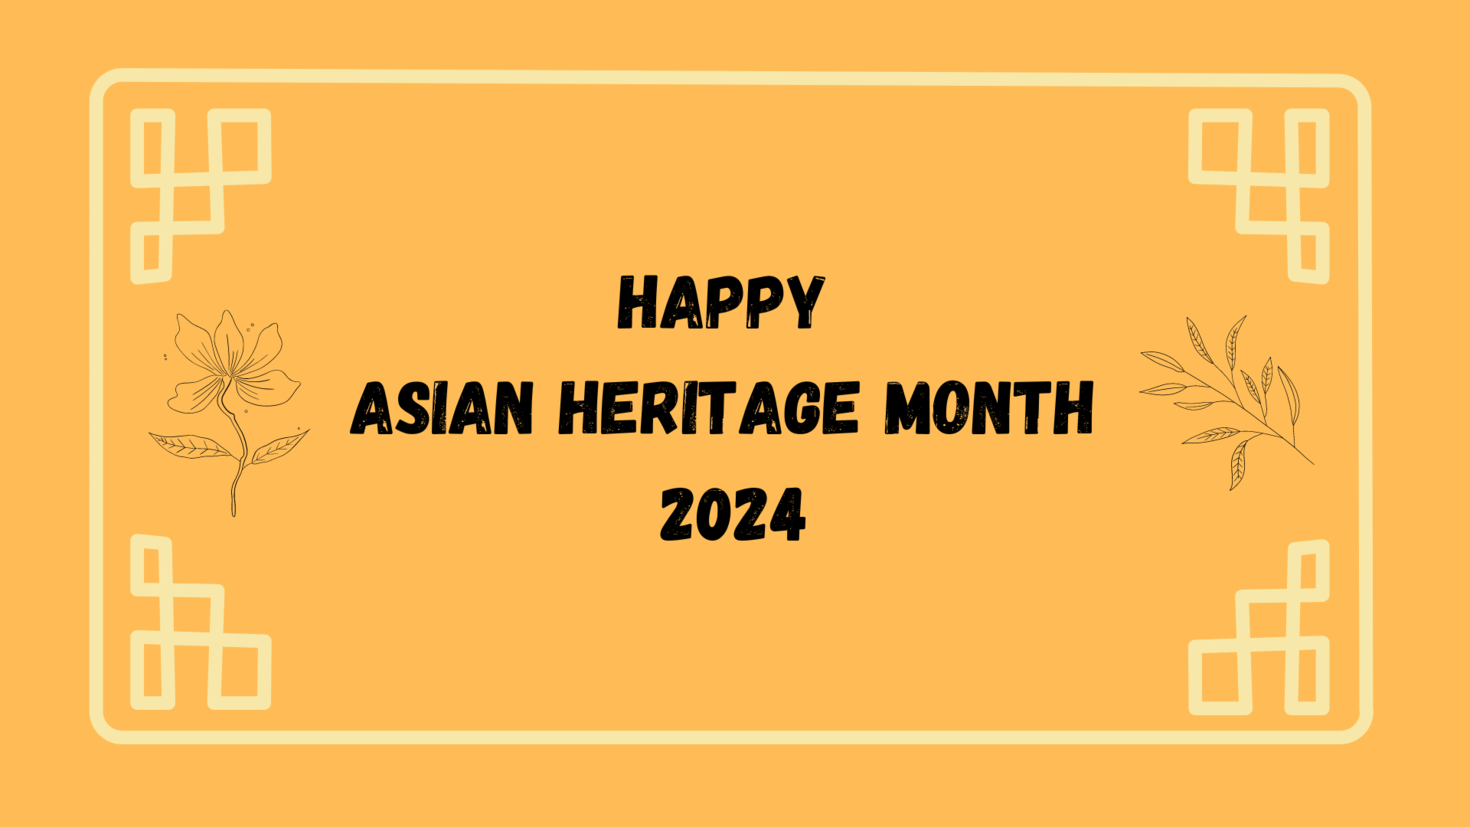 Asian Heritage Month poster